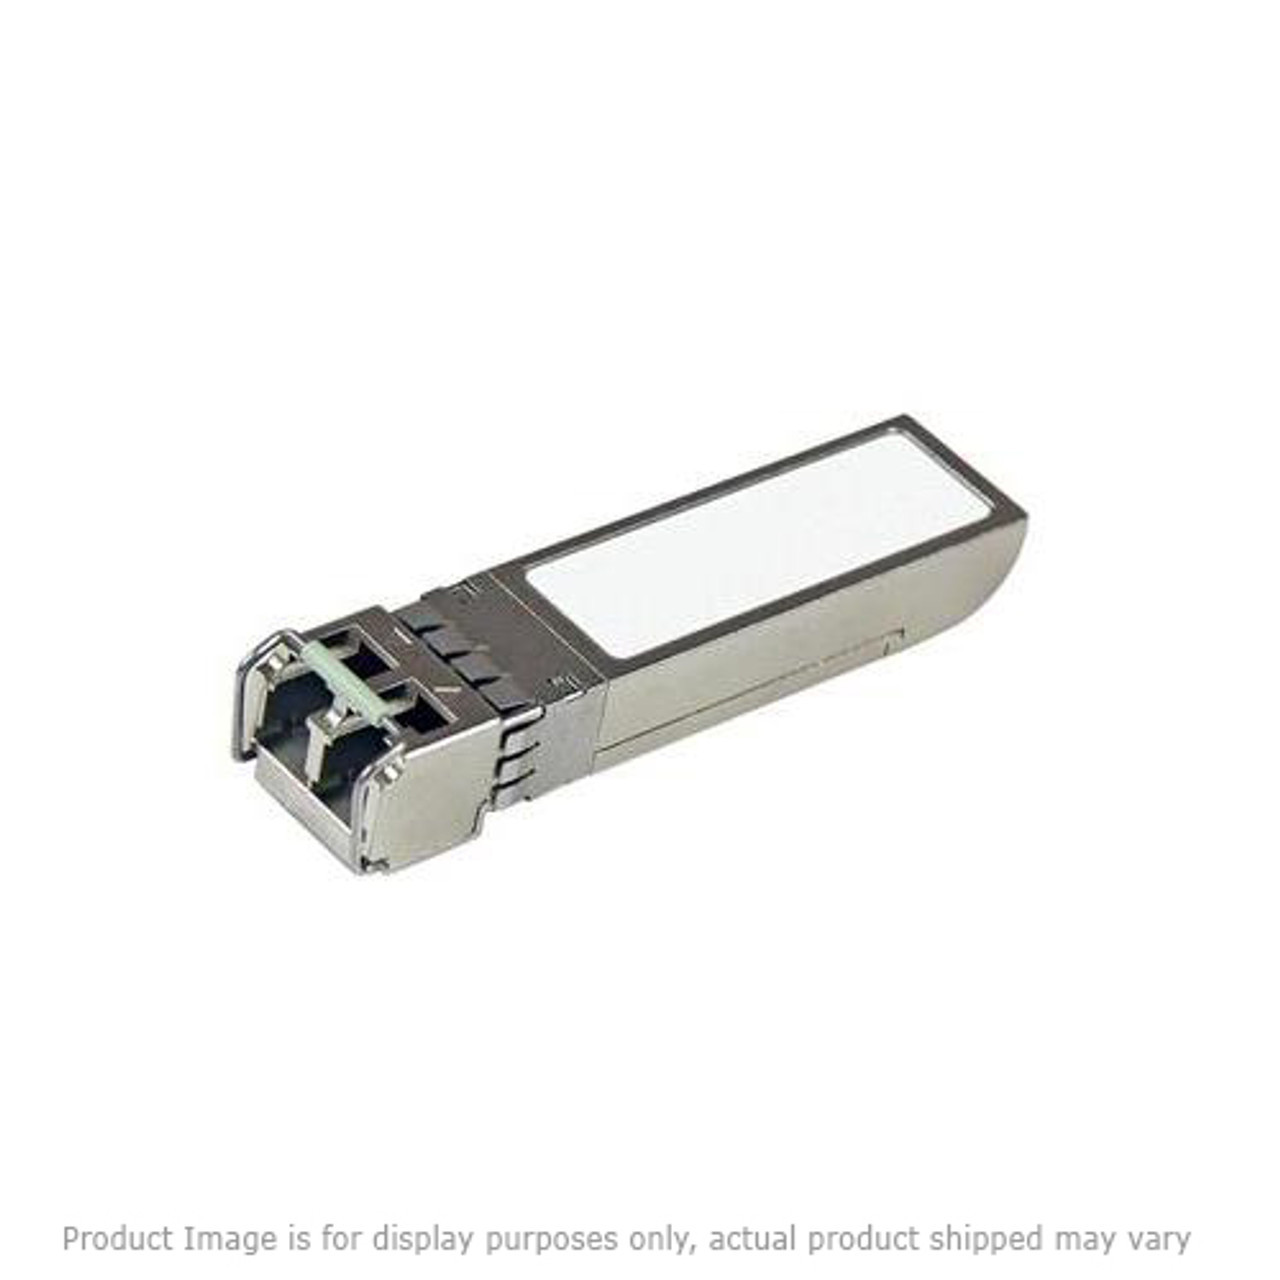 MGBIC-LC02 Enterasys 1Gbps 1000Base-TX Copper 100m RJ-45 Connector SFP Transceiver Module (Refurbished)